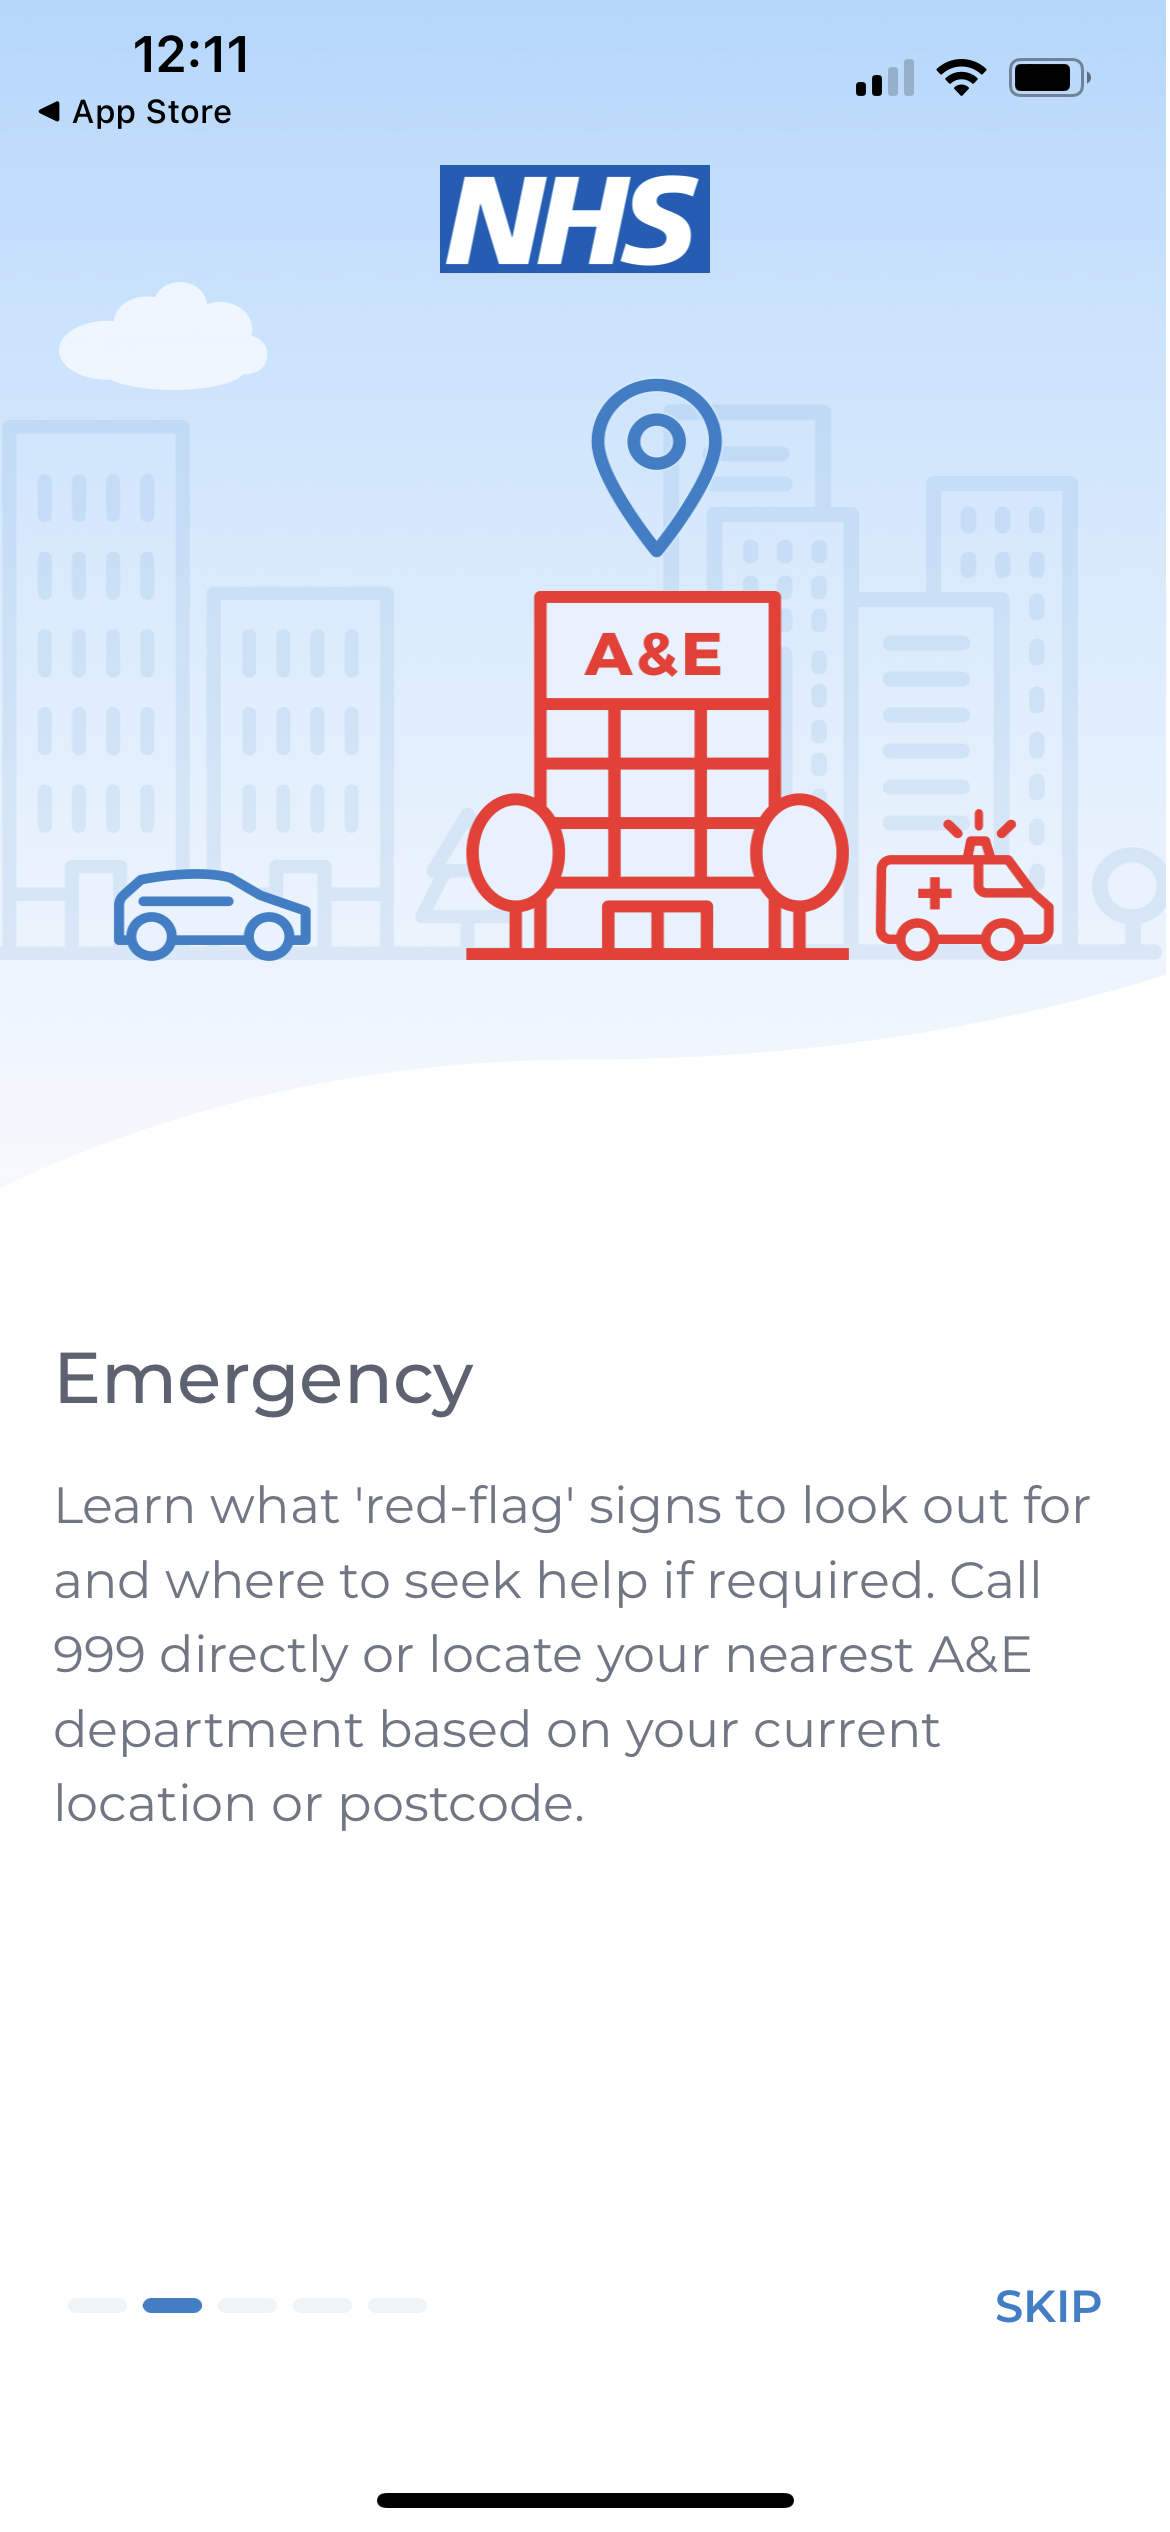 Emergency
Learn what 'red-flag' signs to look out for and where to seek help if required. Call 999 directly or locate your nearest A&E department based on your current location or postcode.